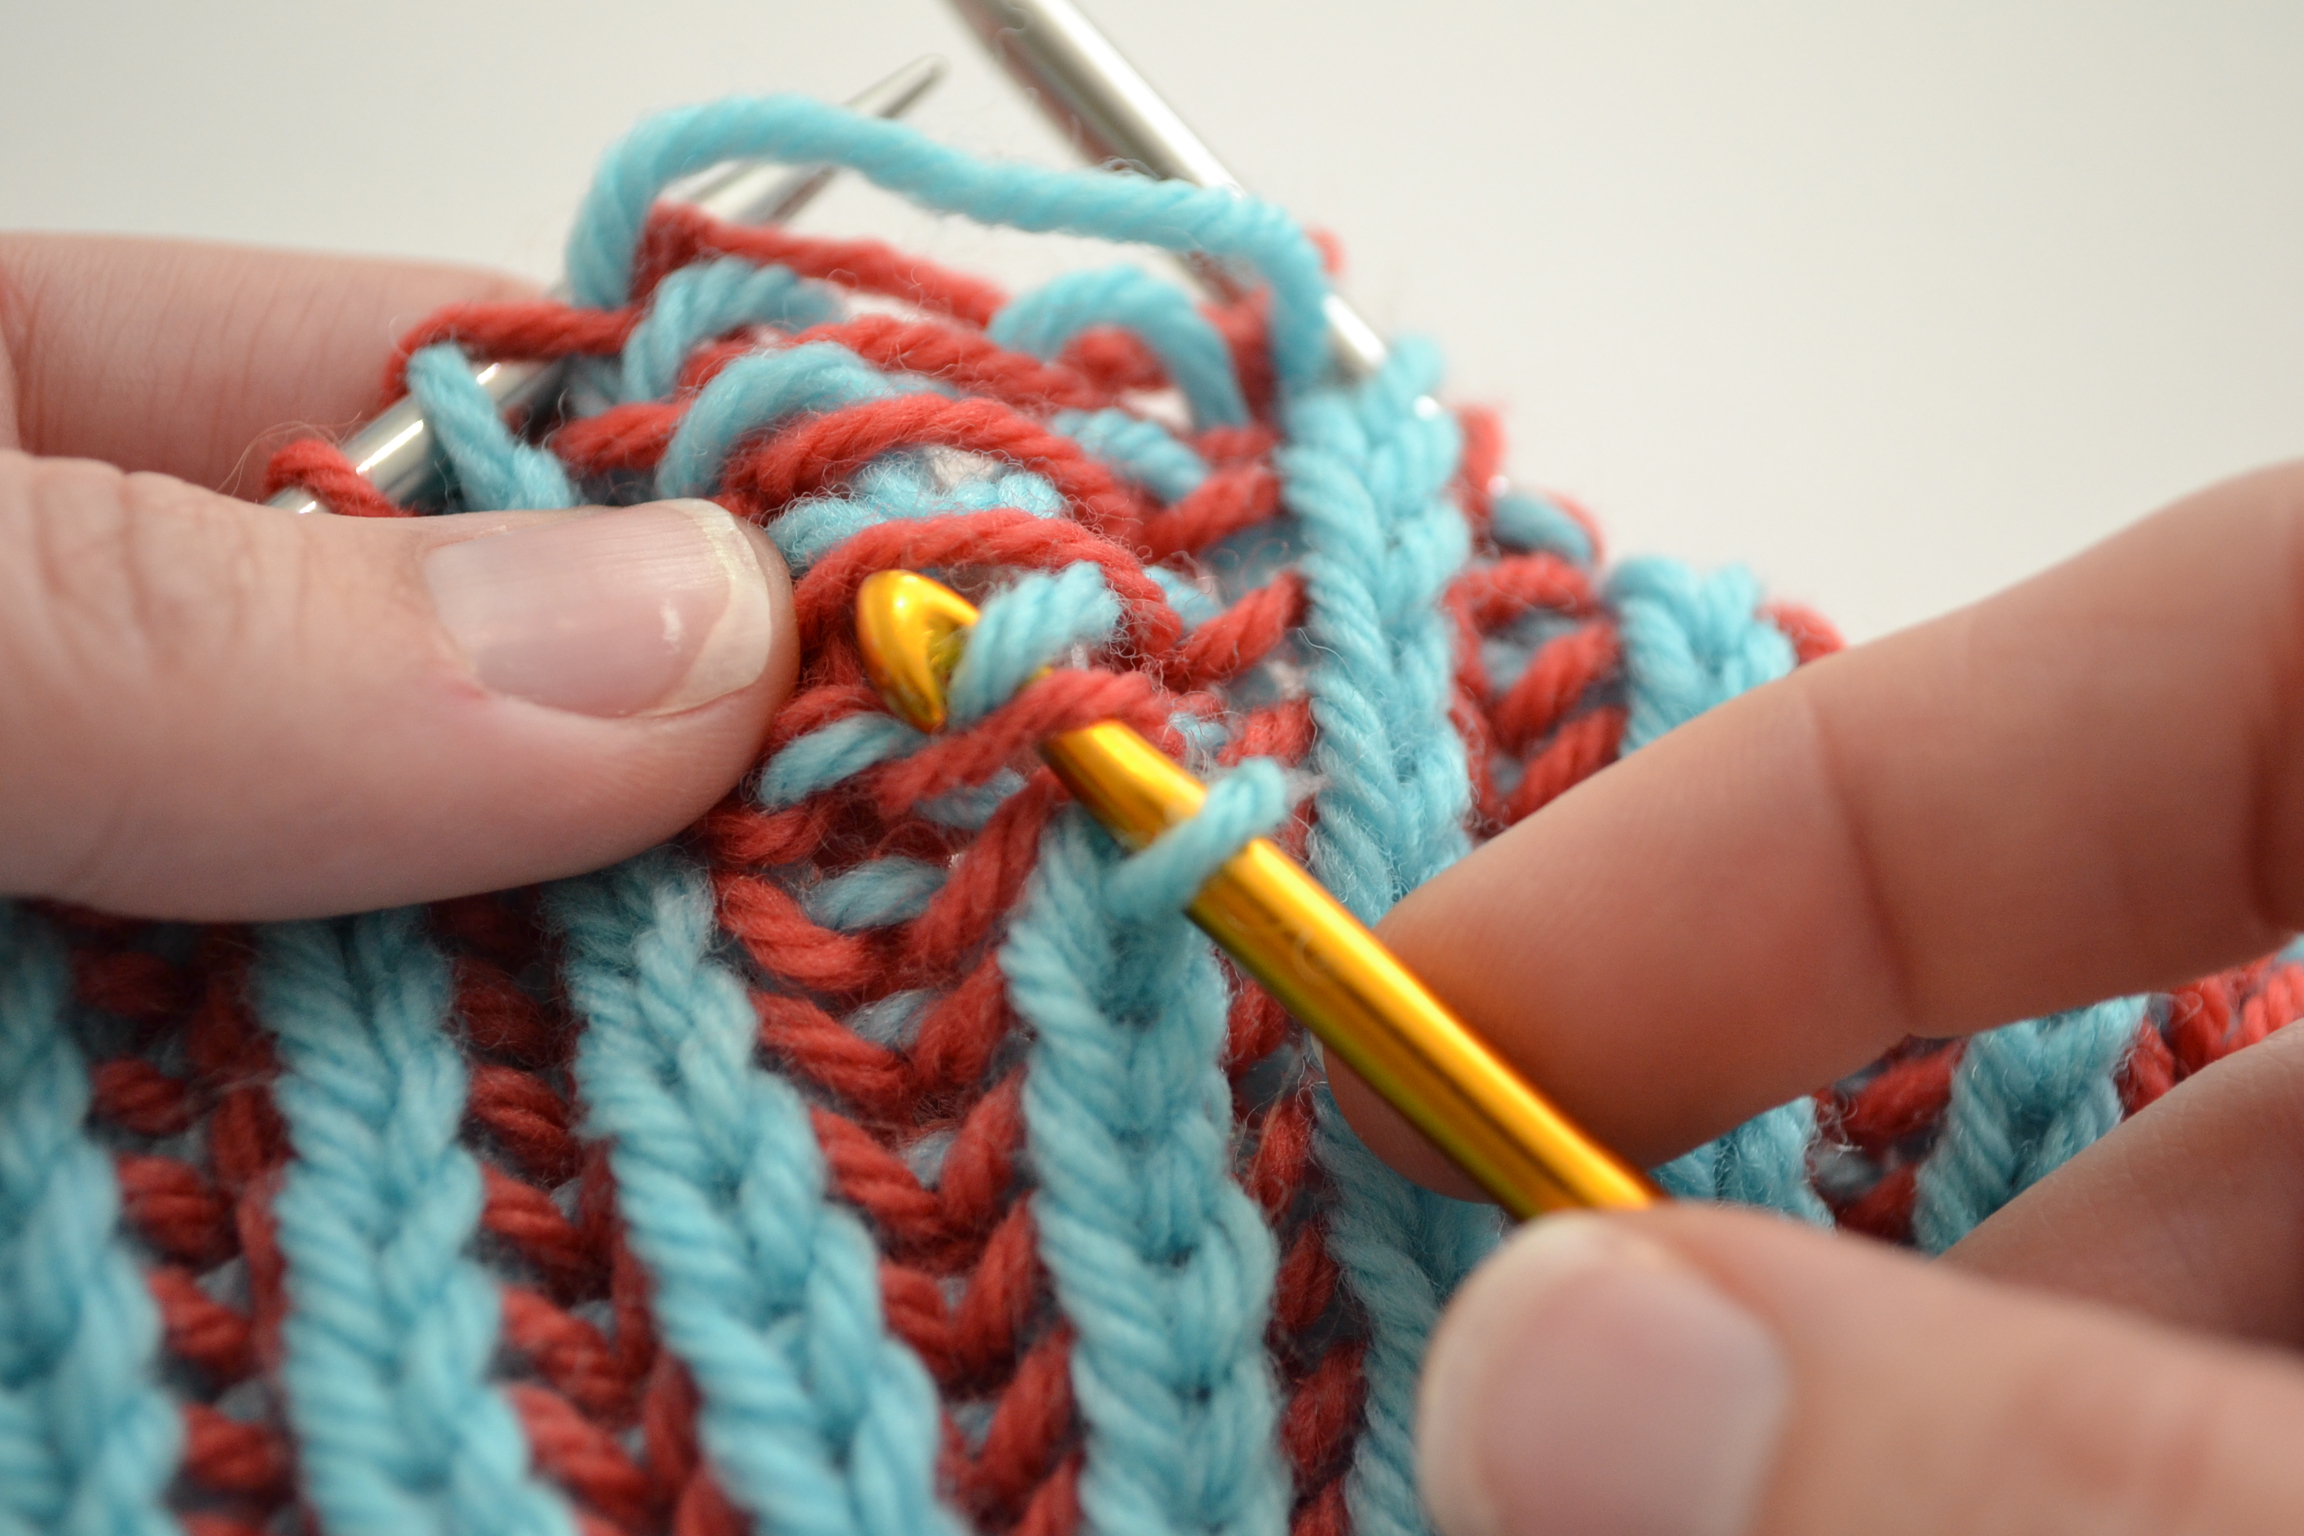 use a crochet hook to pick up dropped brioche stitches